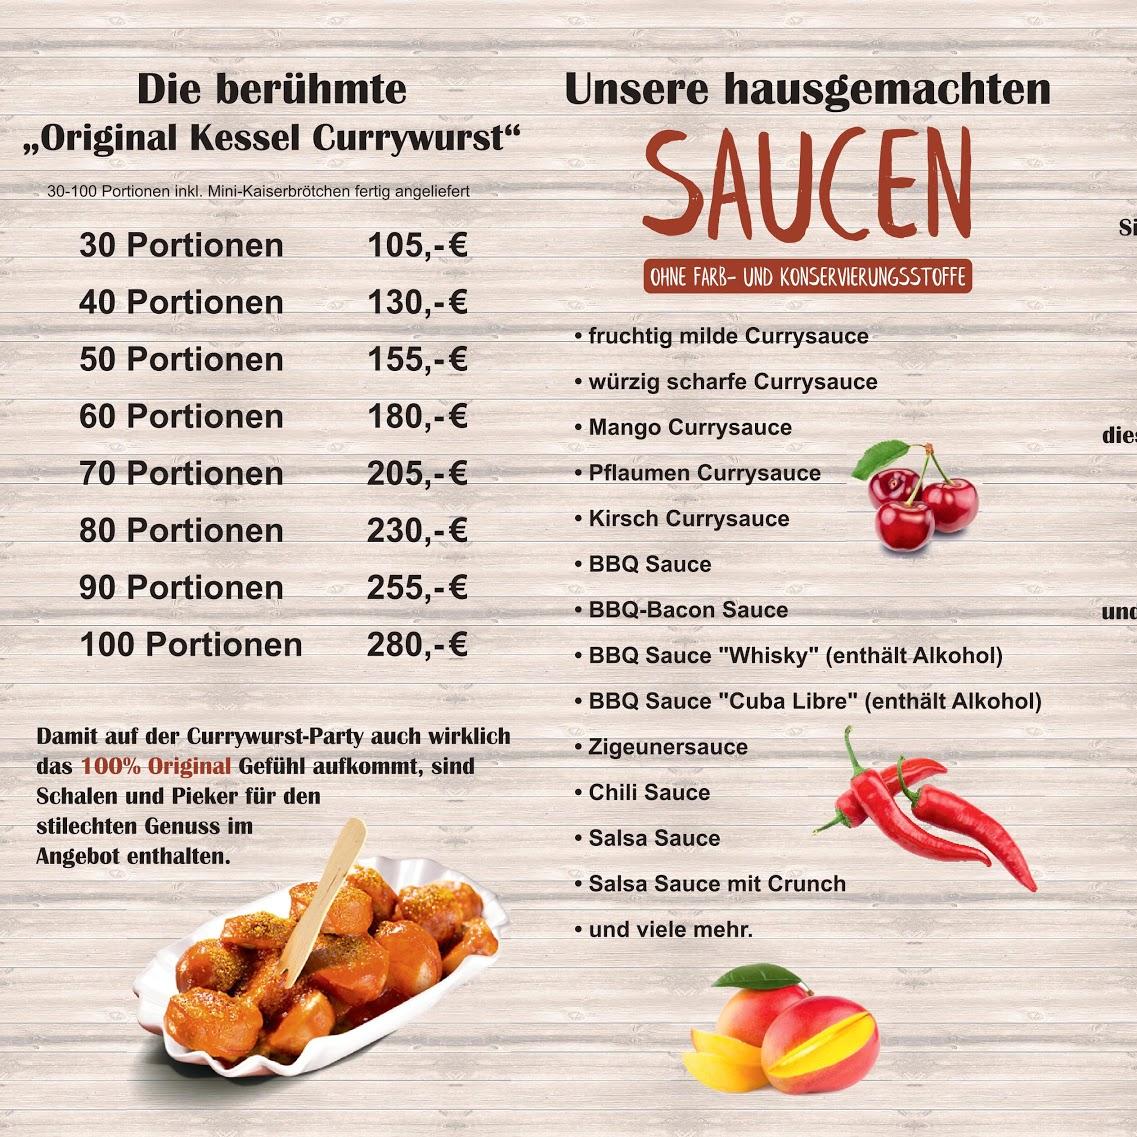 Restaurant "Lecker Currywurst Catering & Eventservice" in Leese